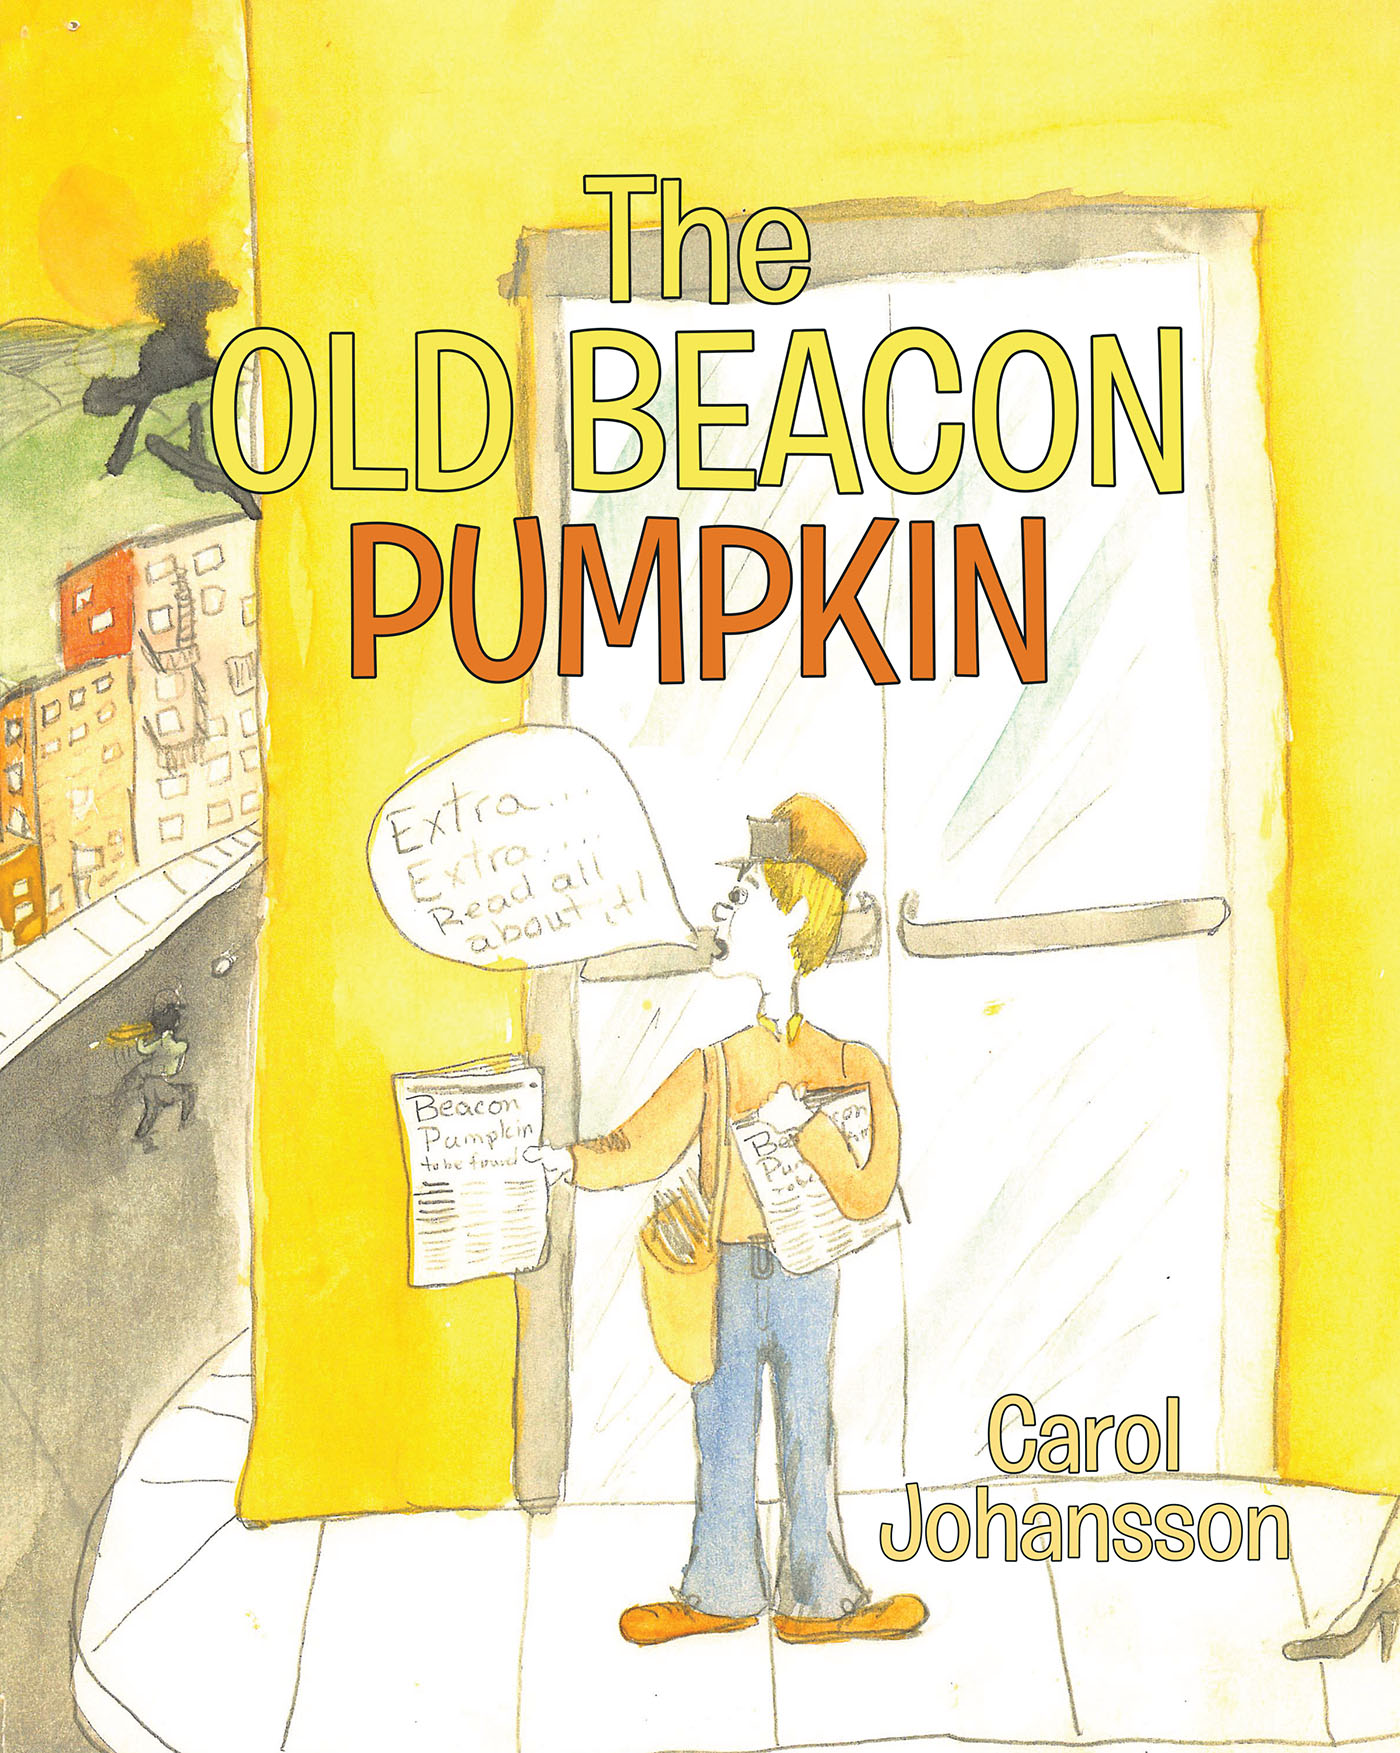 Carol Johansson’s New Book, "The Old Beacon Pumpkin," is a Thrilling and Colorful Children’s Story Celebrating a Spooky and Adventure-Full Night of Halloween Fun